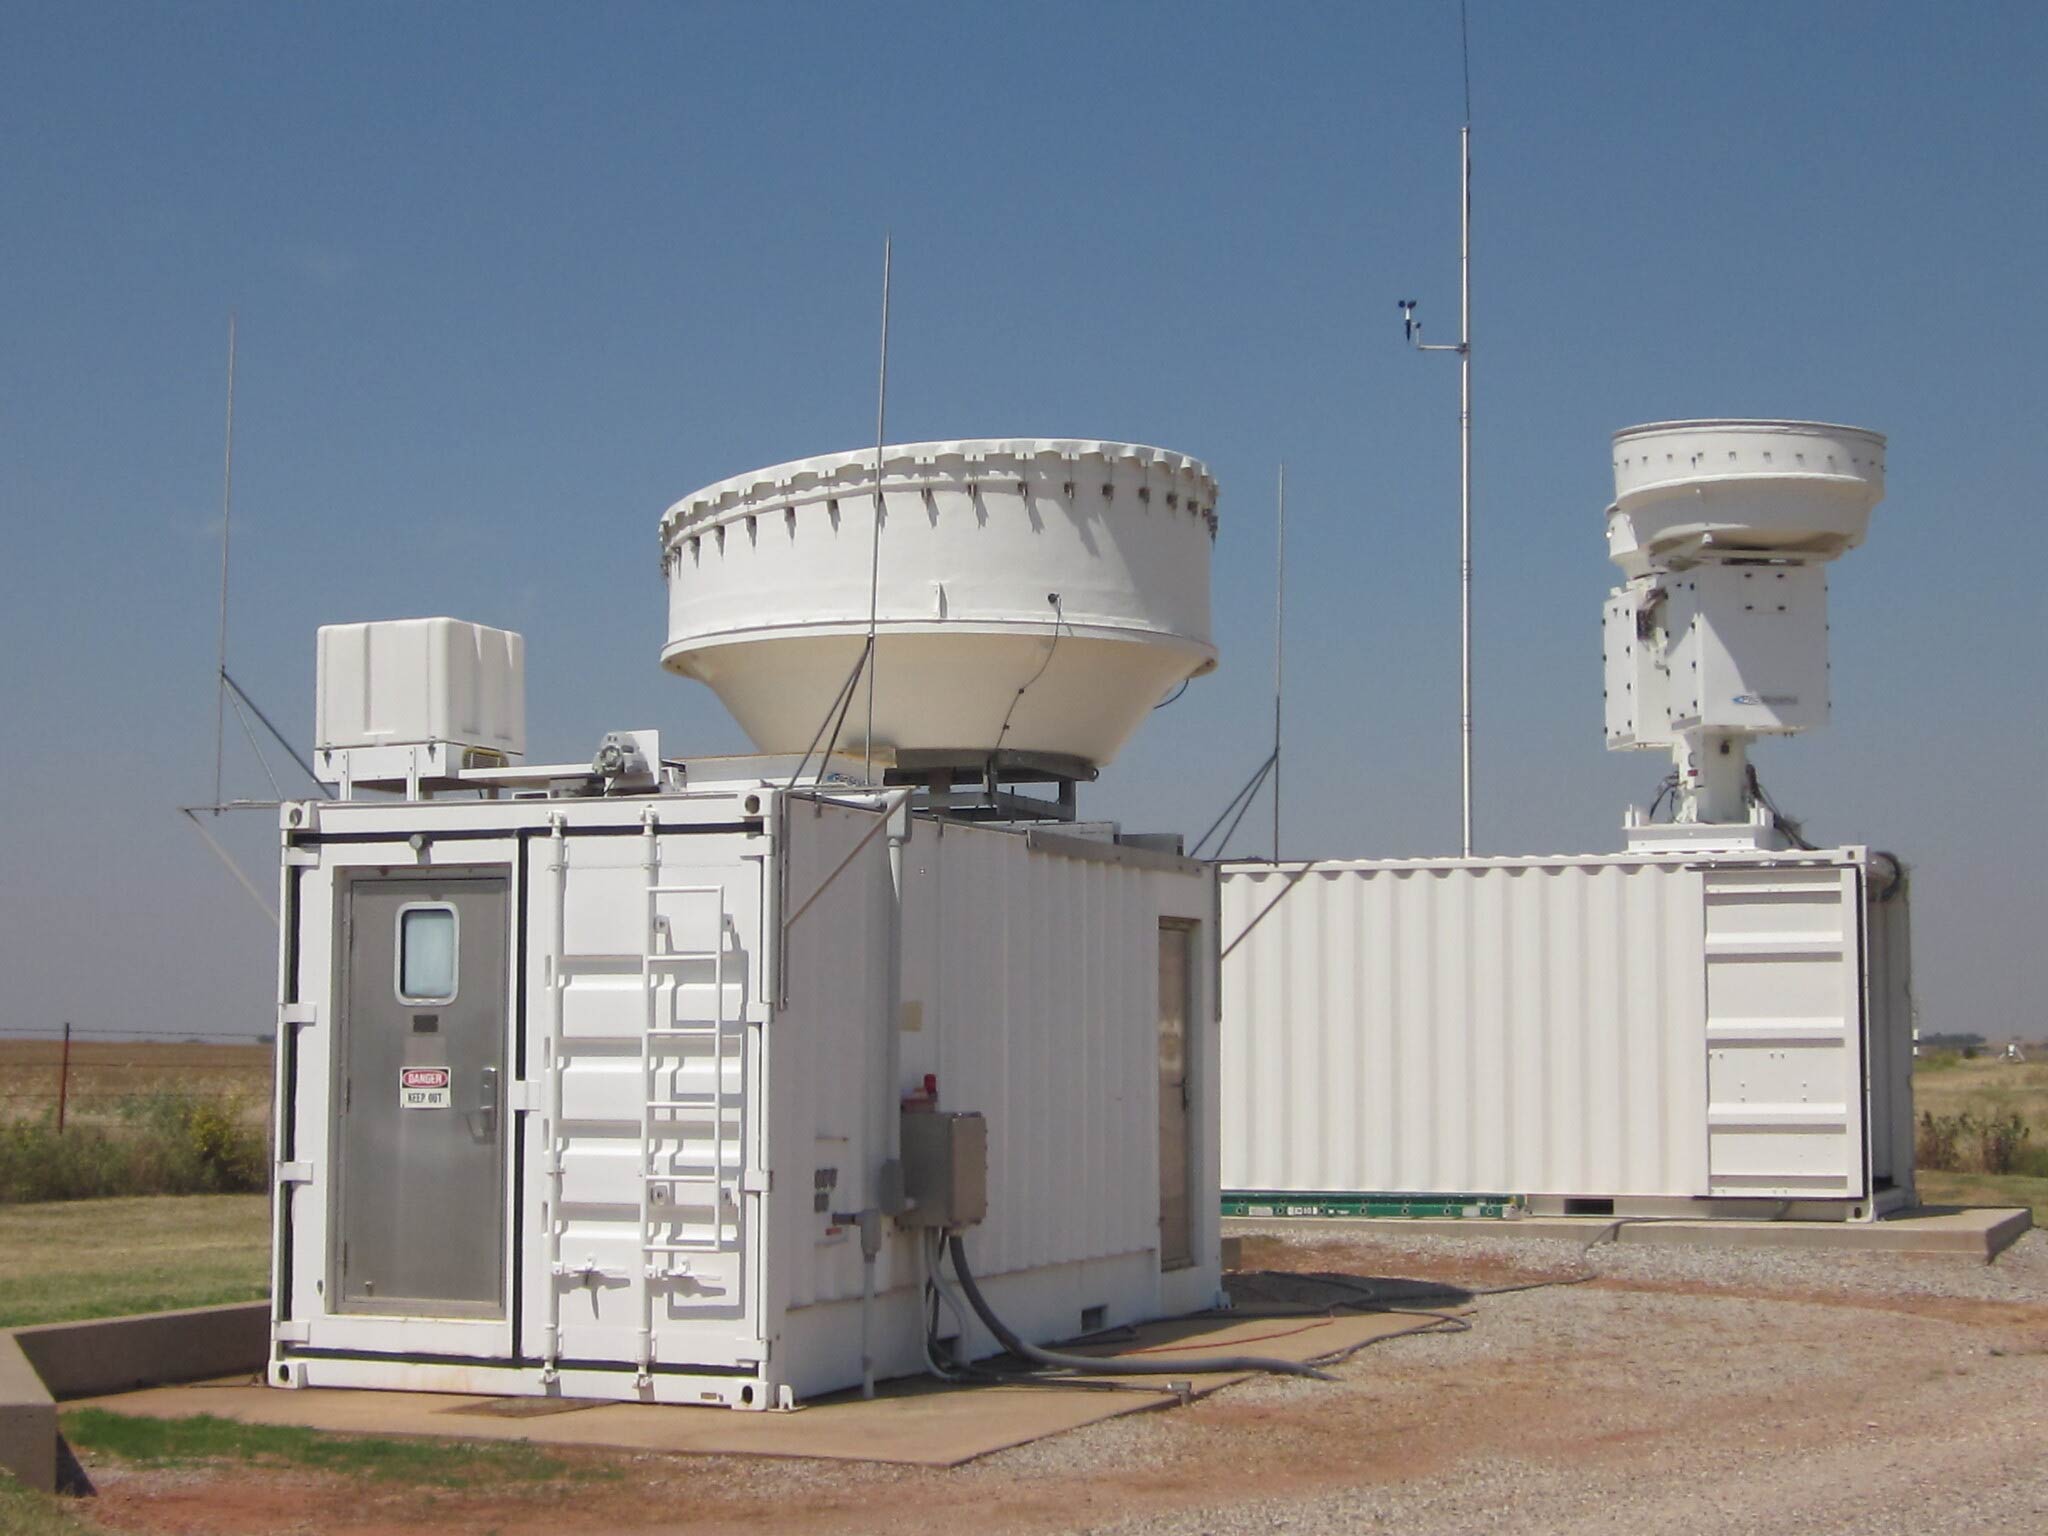 The picture shows radars at the Southern Great Plains atmospheric observatory.